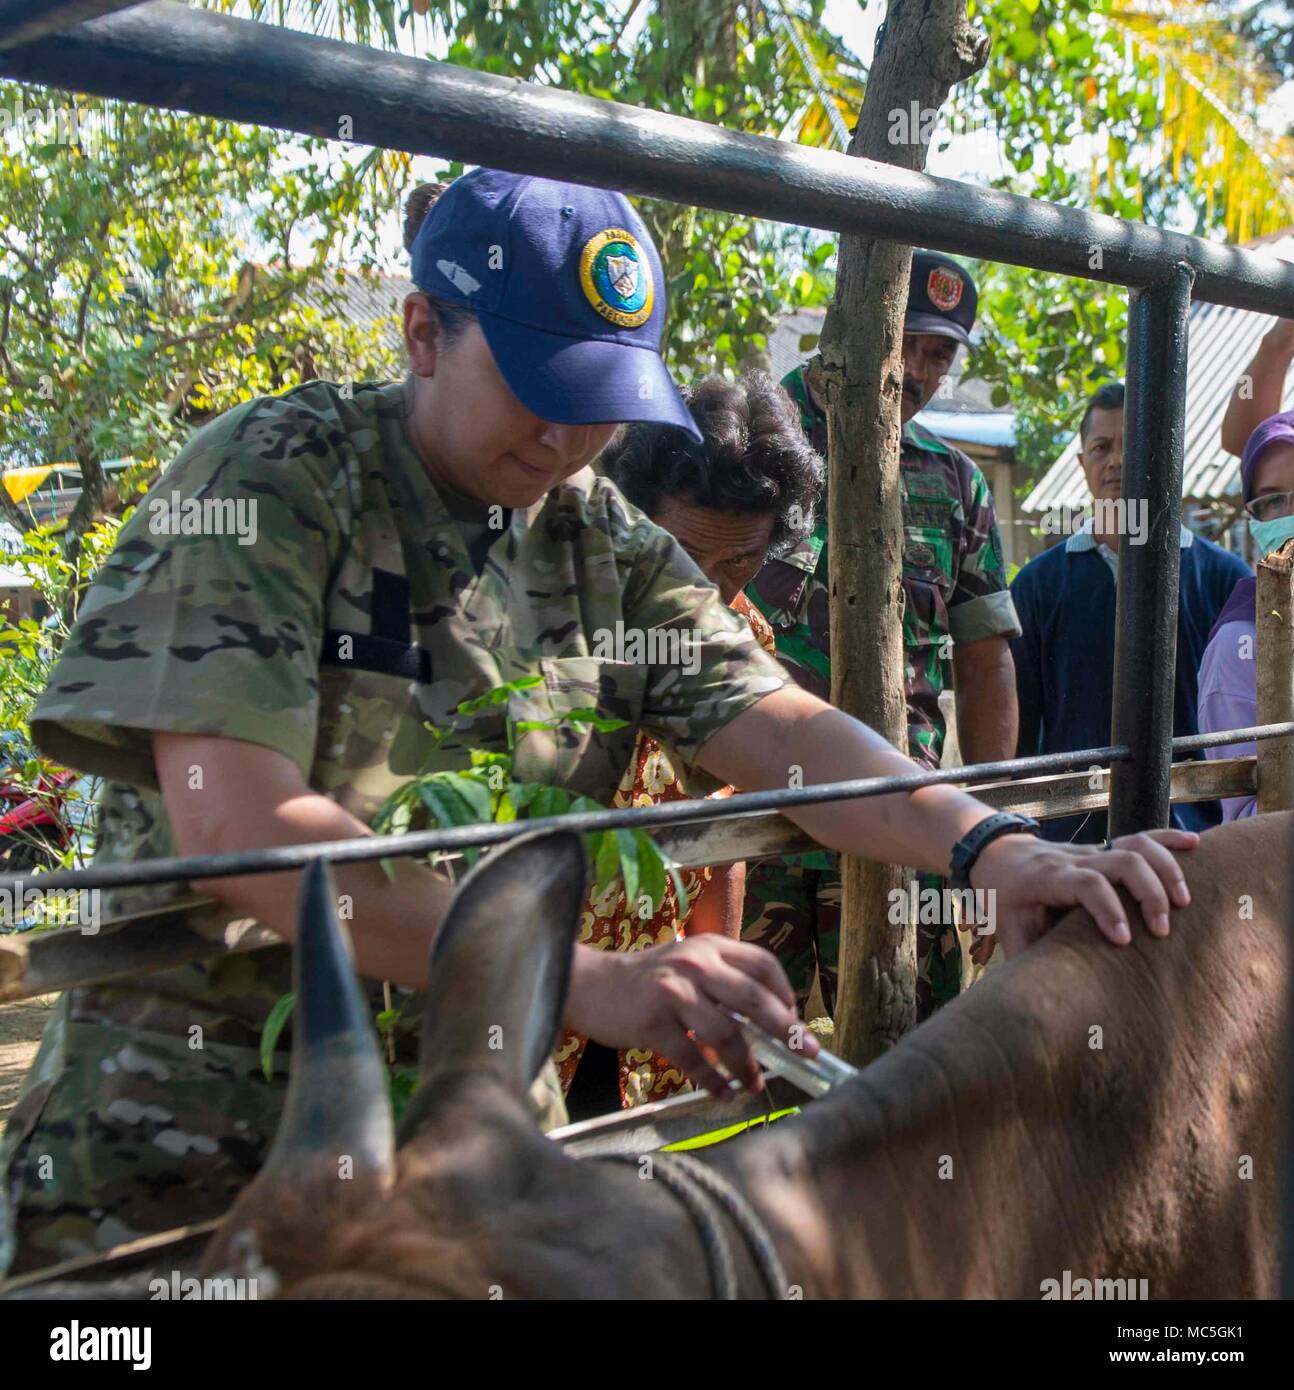 180406-N-NH199-0027  BENGKULU, INDONESIA (April 6, 2018) Army Spc. Toni Weaver, from Castroville, Texas, assigned to Military Sealift Command hospital ship USNS Mercy (T-AH 19) vaccinates a cow during a large animal veterinary subject matter expert exchange. Mercy is currently deployed in support of Pacific Partnership 2018 (PP18). PP18’s mission is to work collectively with host and partner nations to enhance regional interoperability and disaster response capabilities, increase stability and security in the region, and foster new and enduring friendships across the Indo-Pacific Region. Pacif Stock Photo